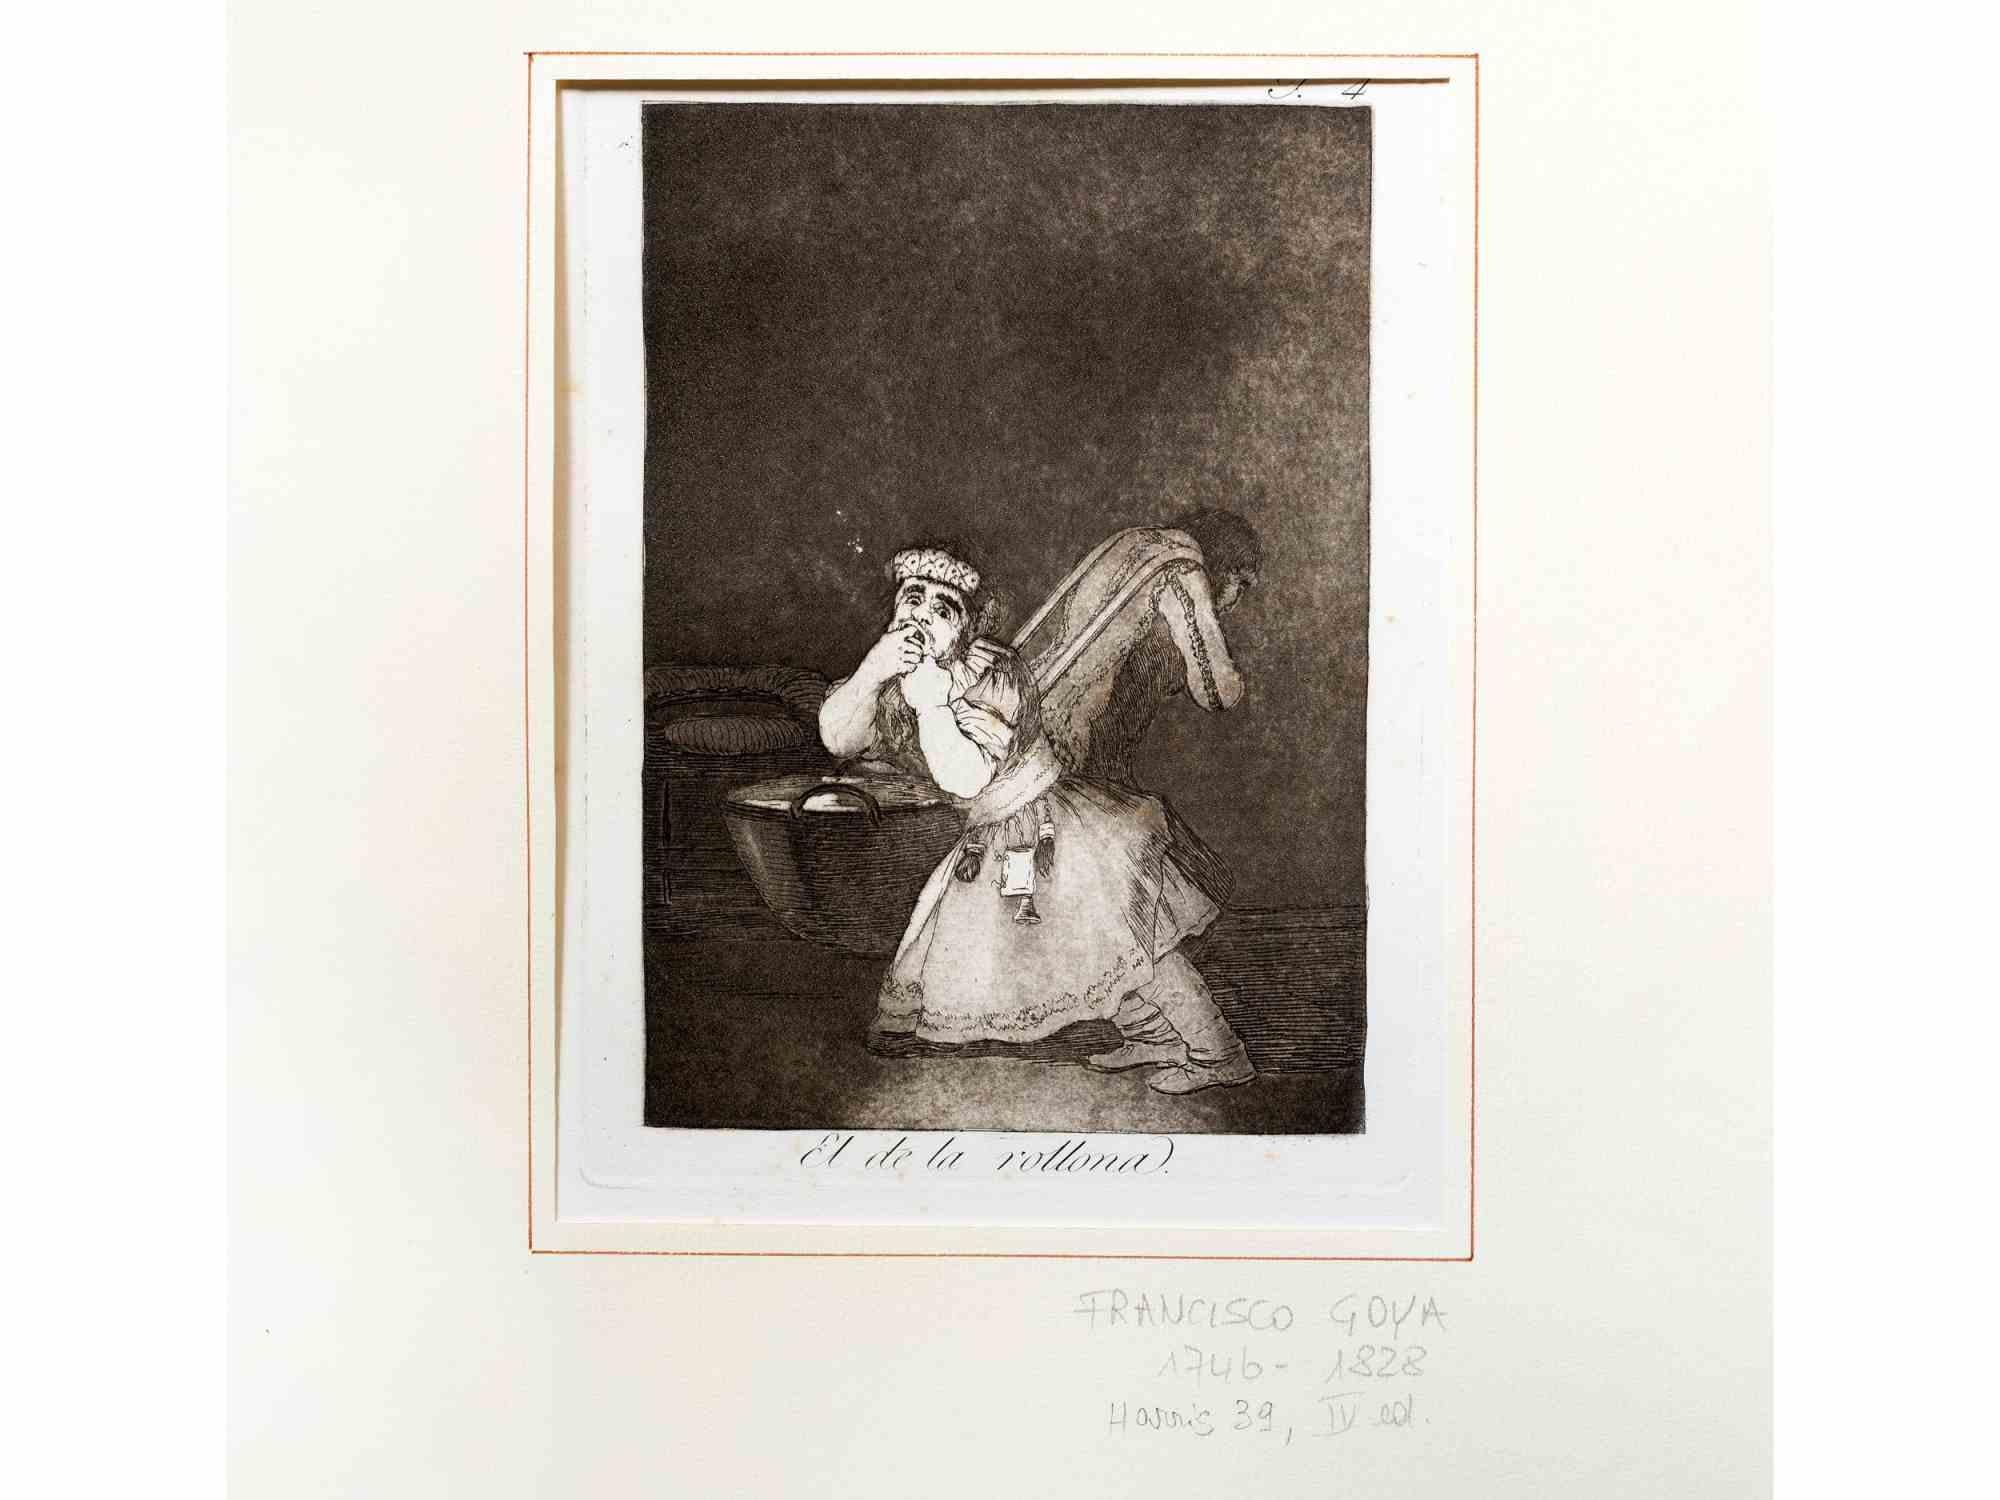 El de la Rollona is a modern artwork realized by Francisco Goya and published as fourth edition in 1878 by the Calcografia Nacional.

Black and white etching and burnished aquatint.

Dimensions: Image 20 x 15 cm Sheet 29 x 21 cm.

The artwork is the